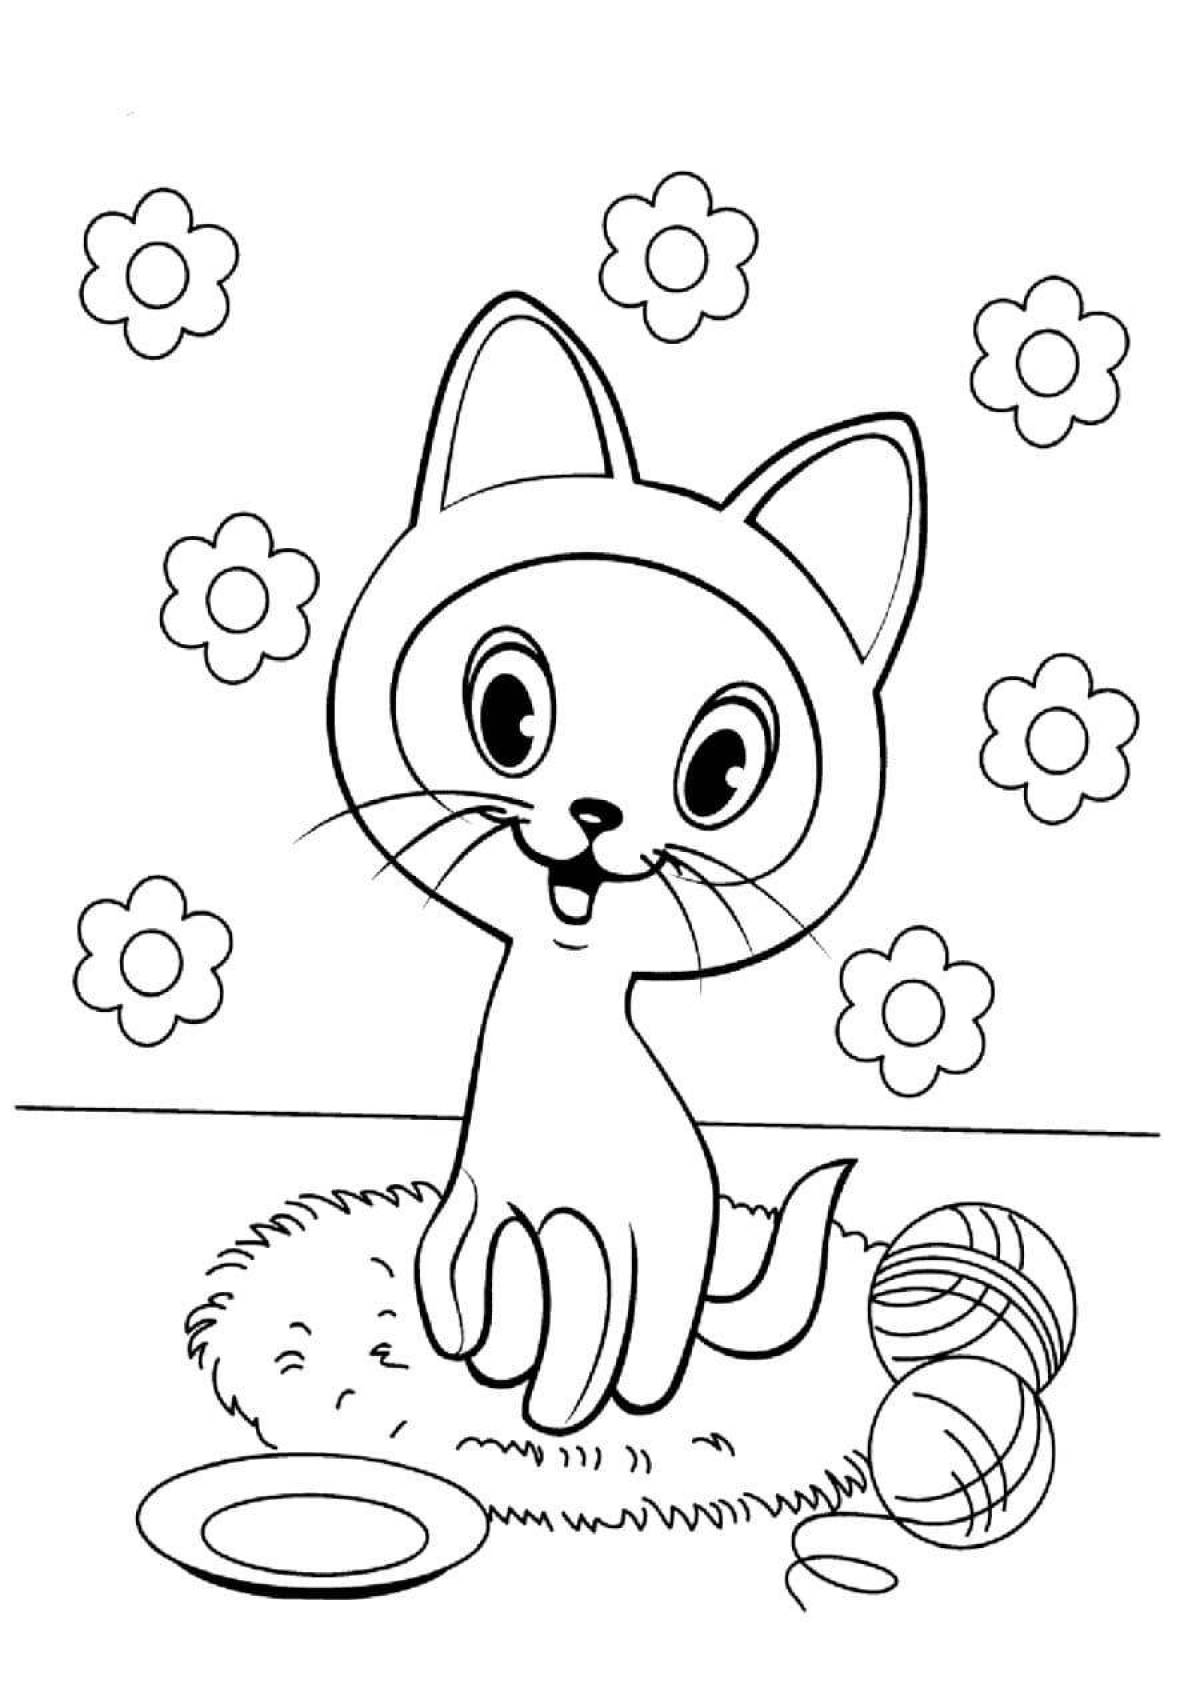 Naughty coloring cat for children 2-3 years old